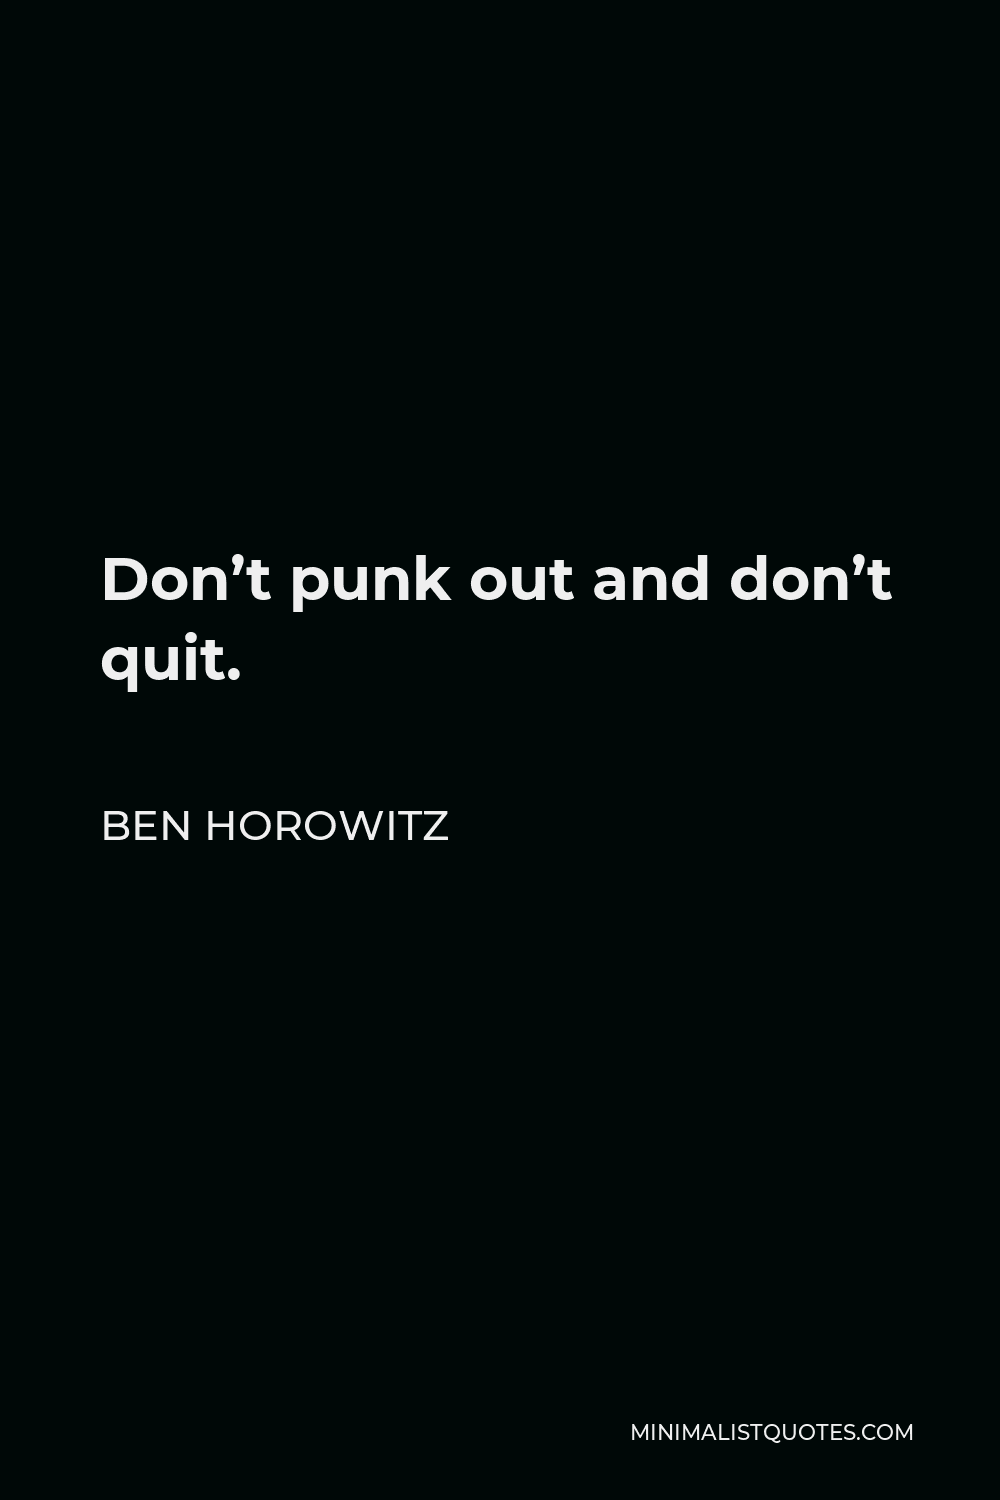 Ben Horowitz Quote - Don’t punk out and don’t quit.